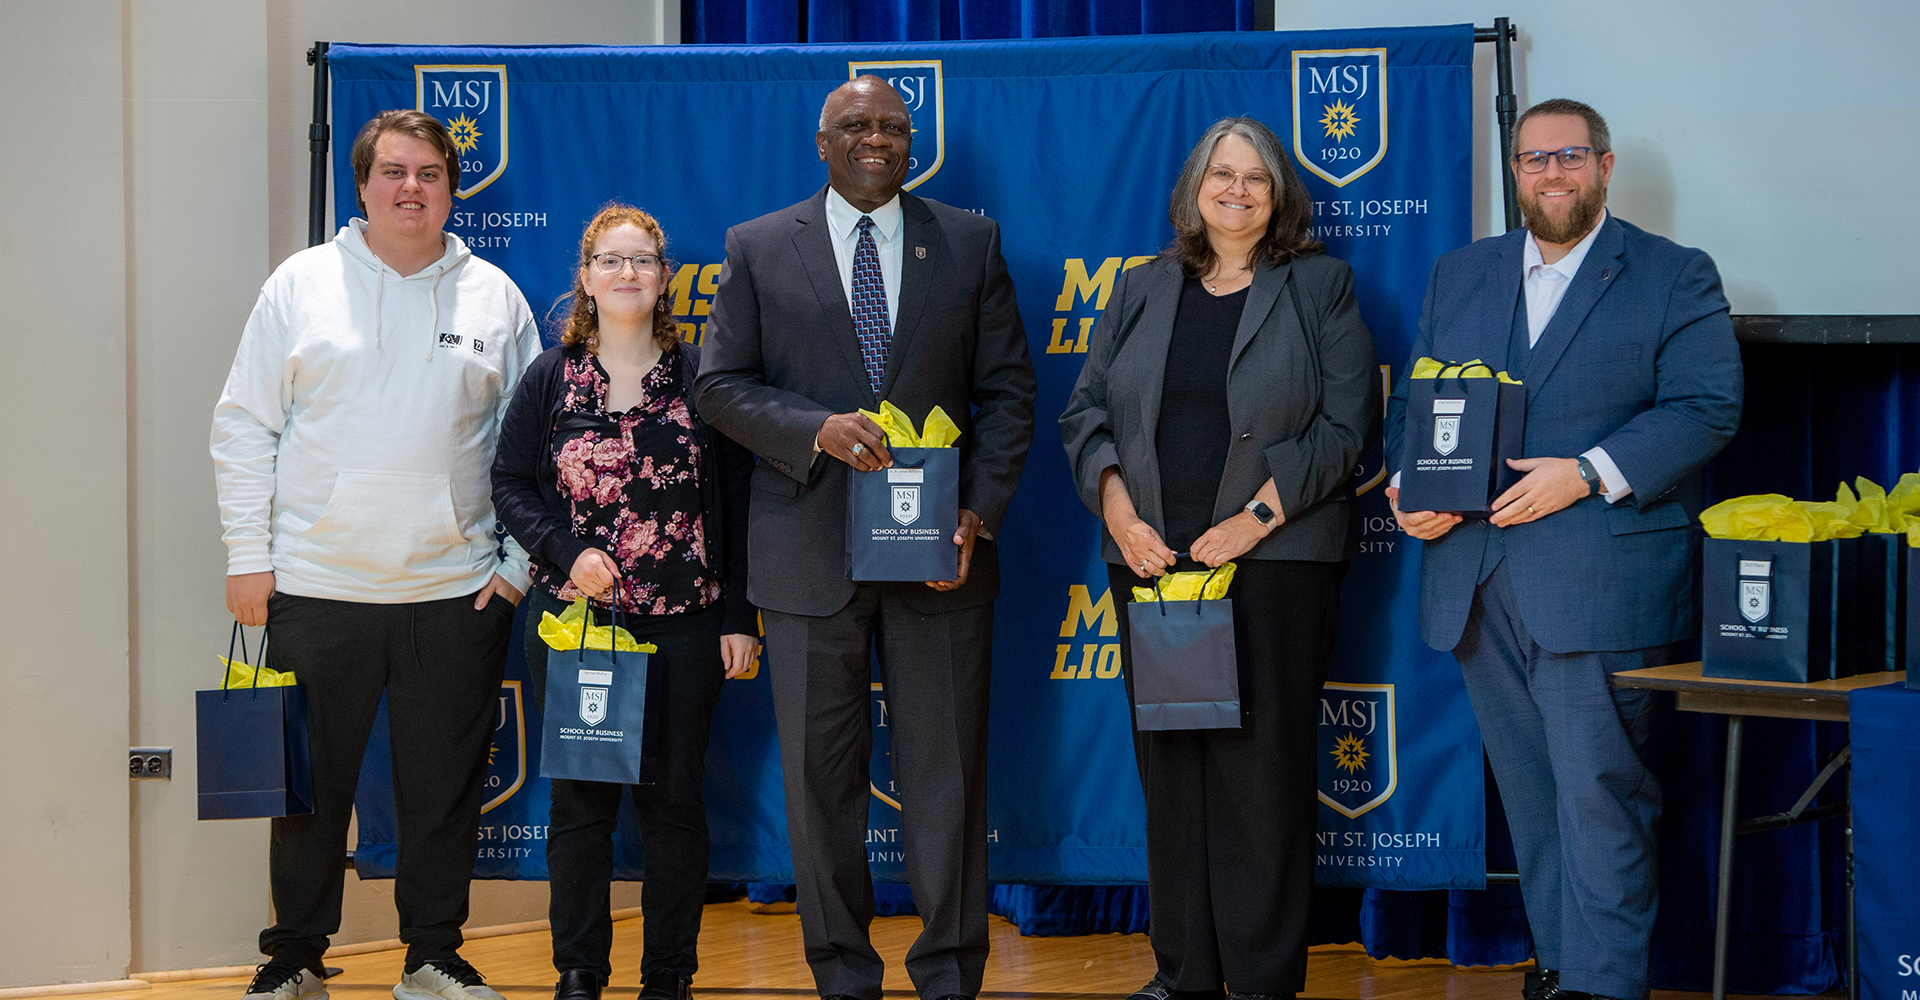 msj president and staff standing with gift bags at high school business competition